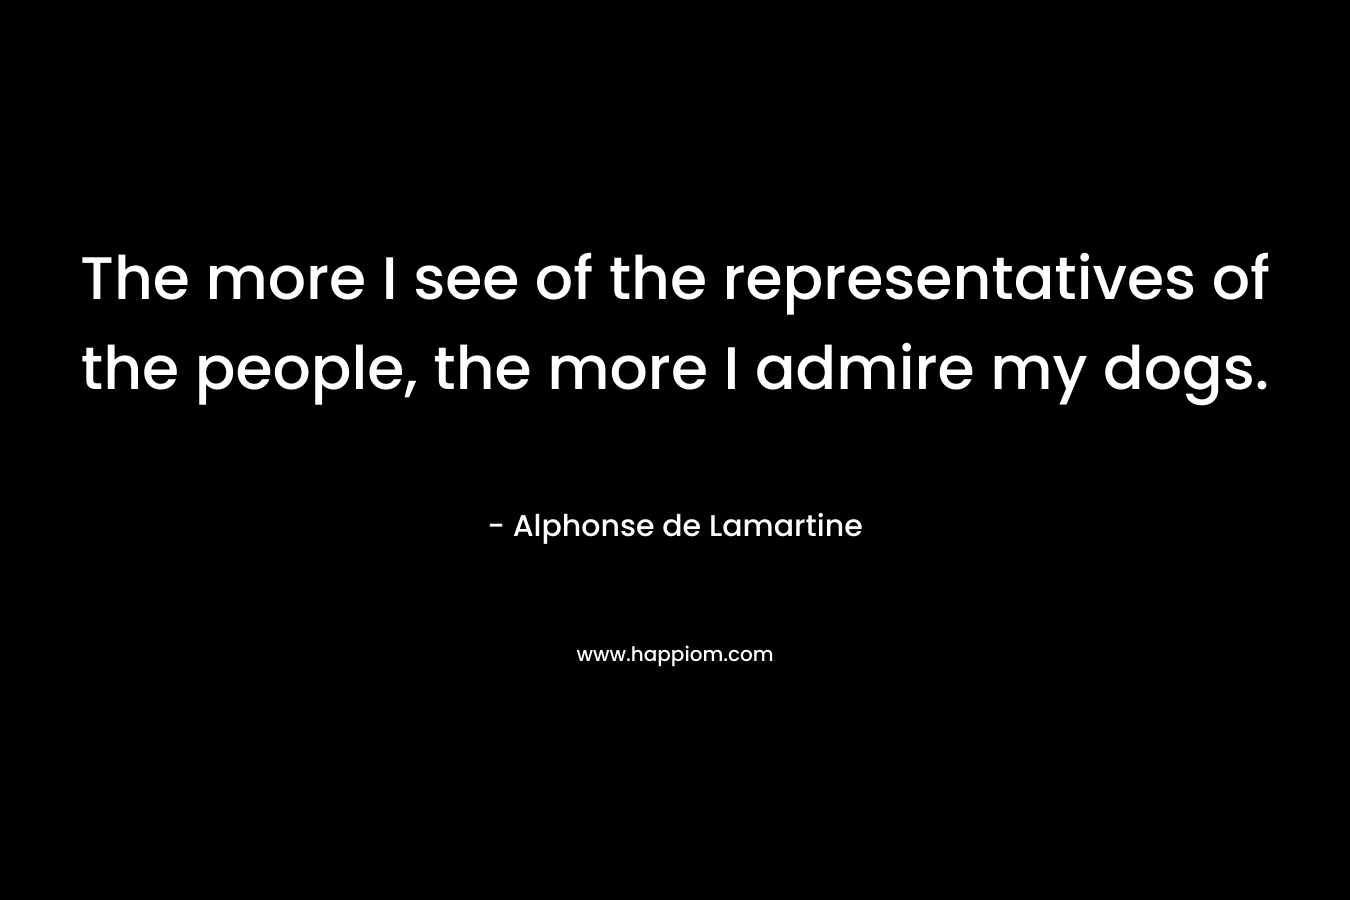 The more I see of the representatives of the people, the more I admire my dogs. – Alphonse de Lamartine